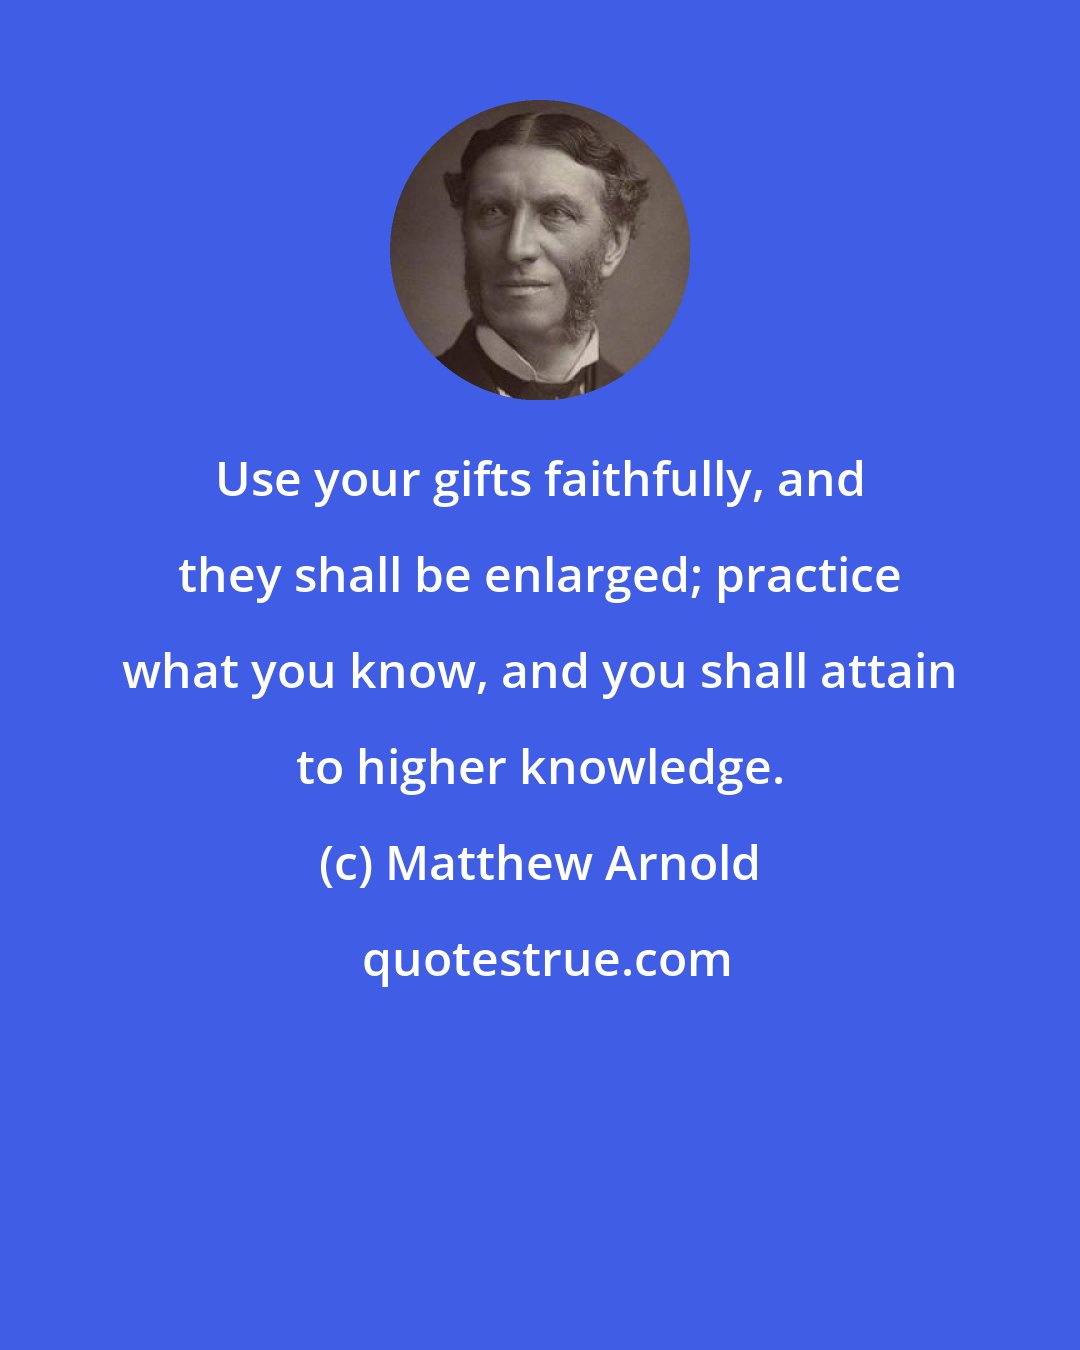 Matthew Arnold: Use your gifts faithfully, and they shall be enlarged; practice what you know, and you shall attain to higher knowledge.